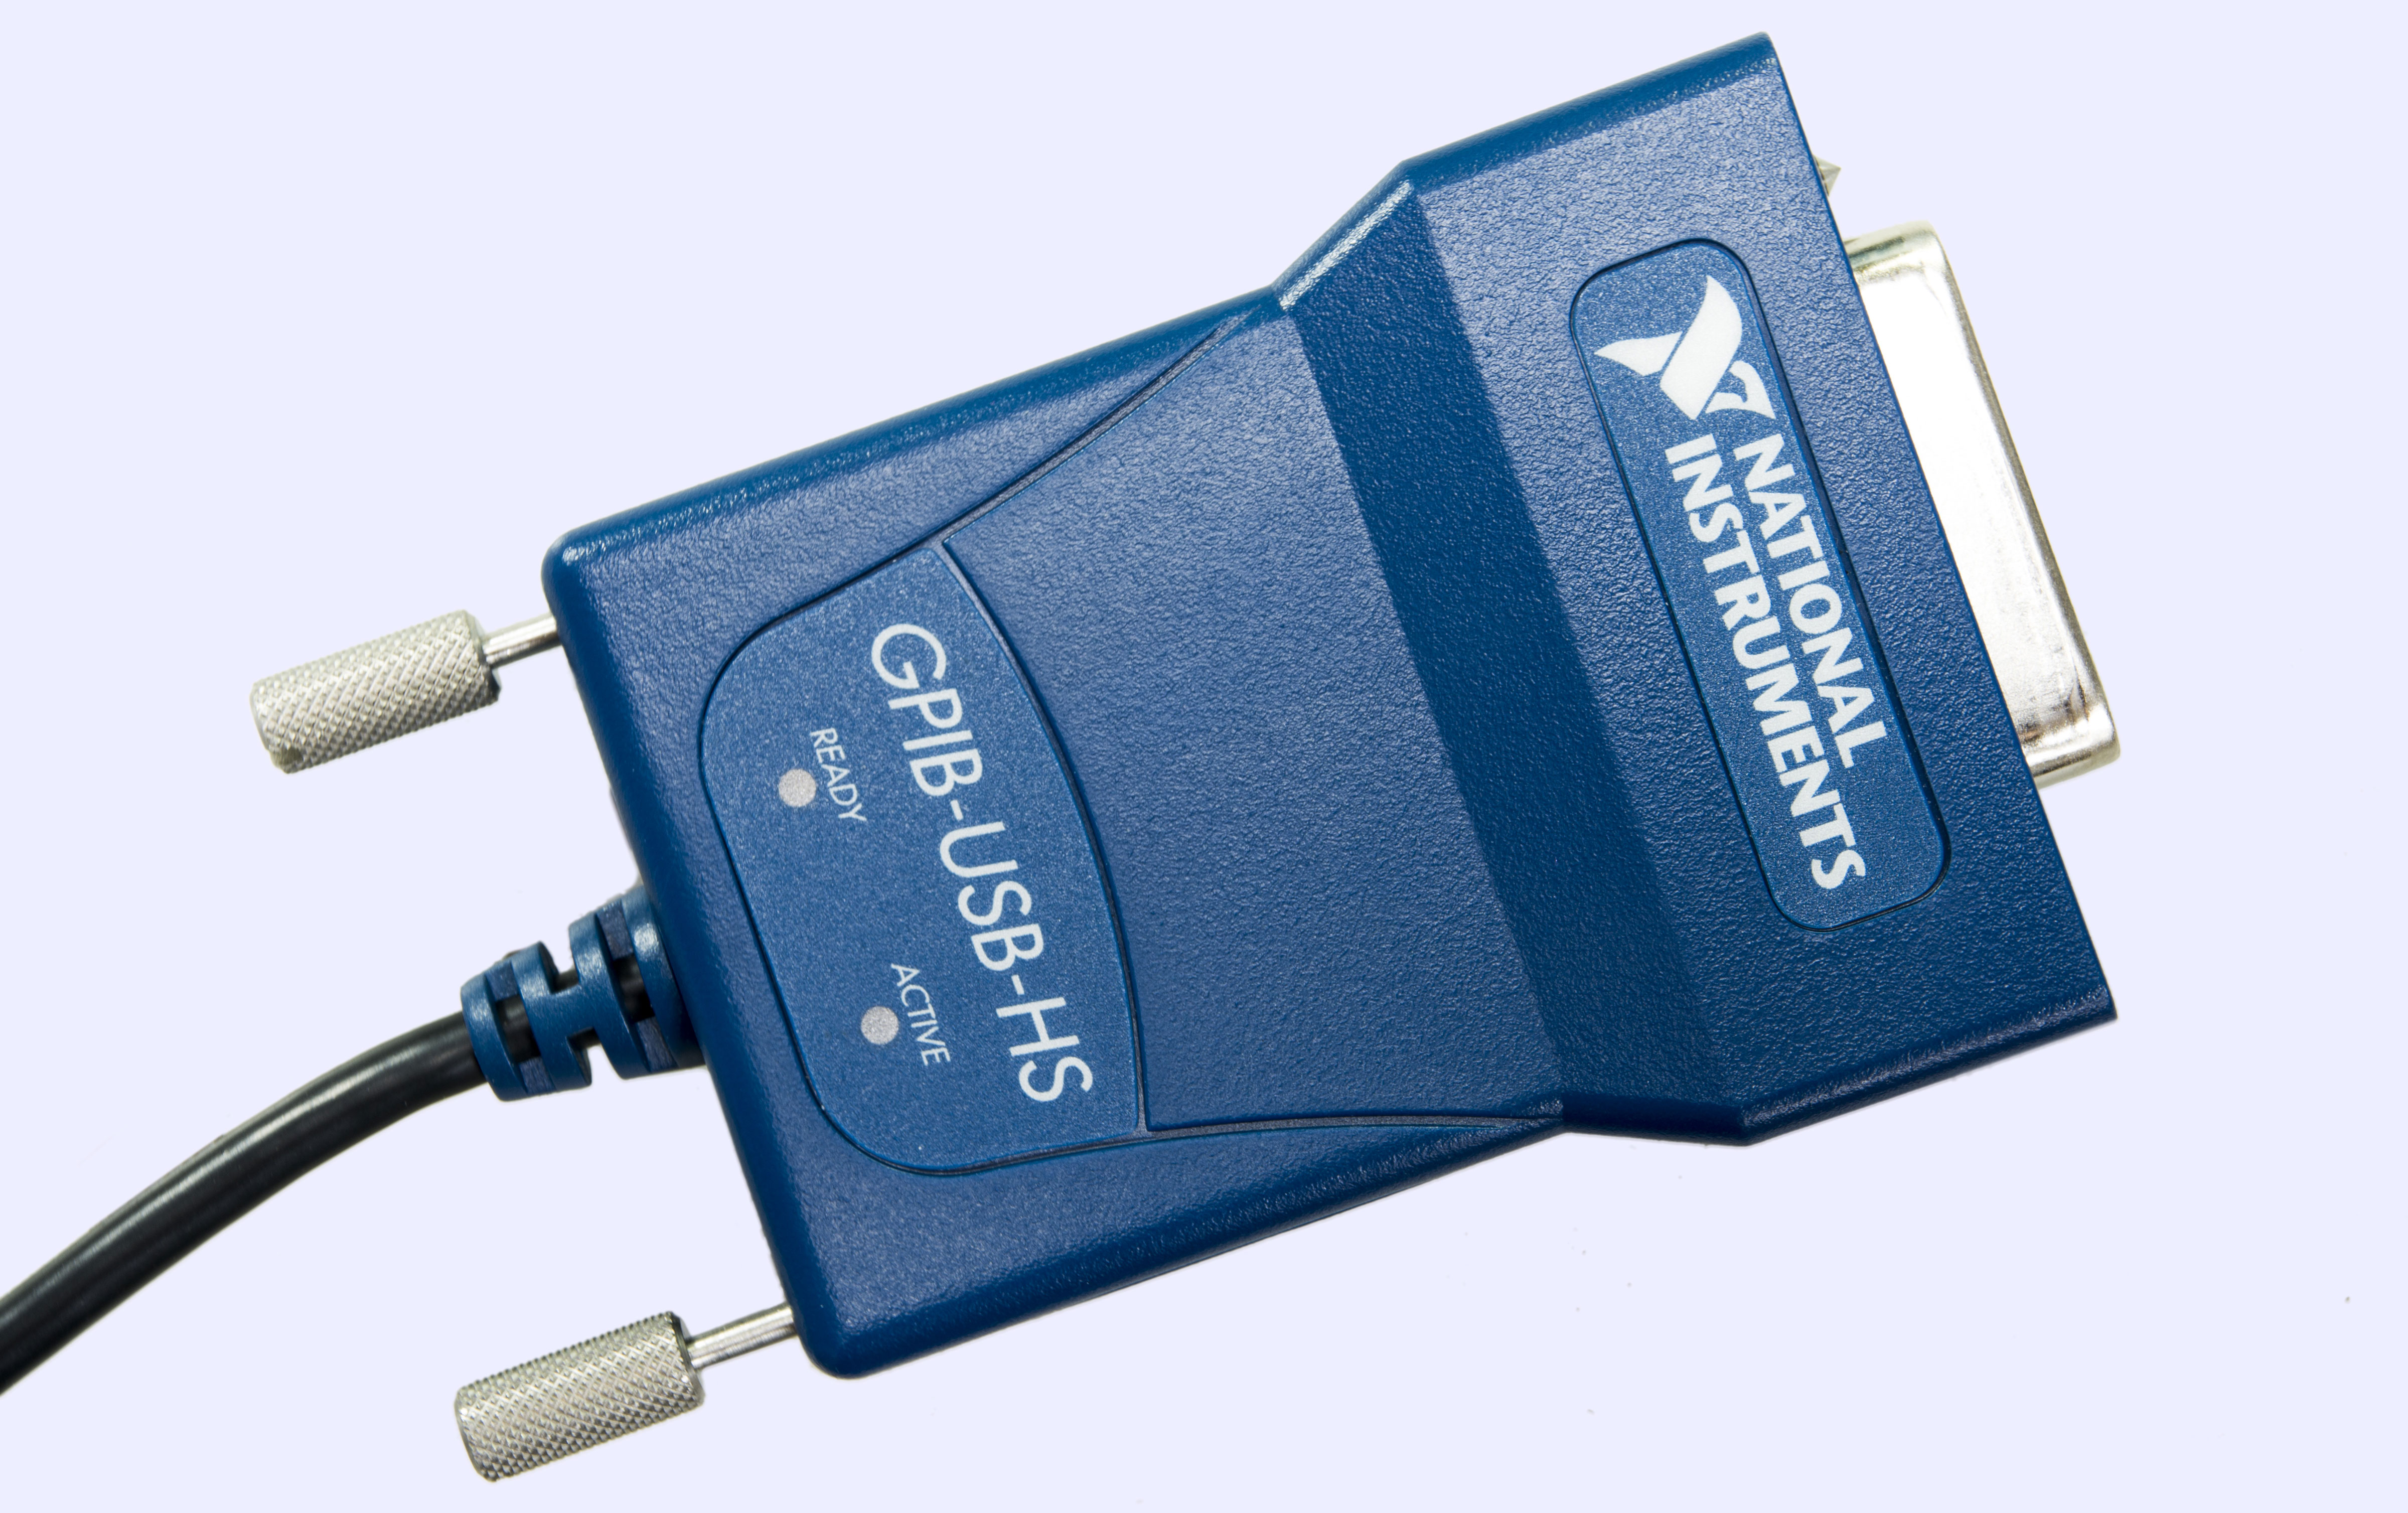 Drivers Standard Microsystems USB Devices